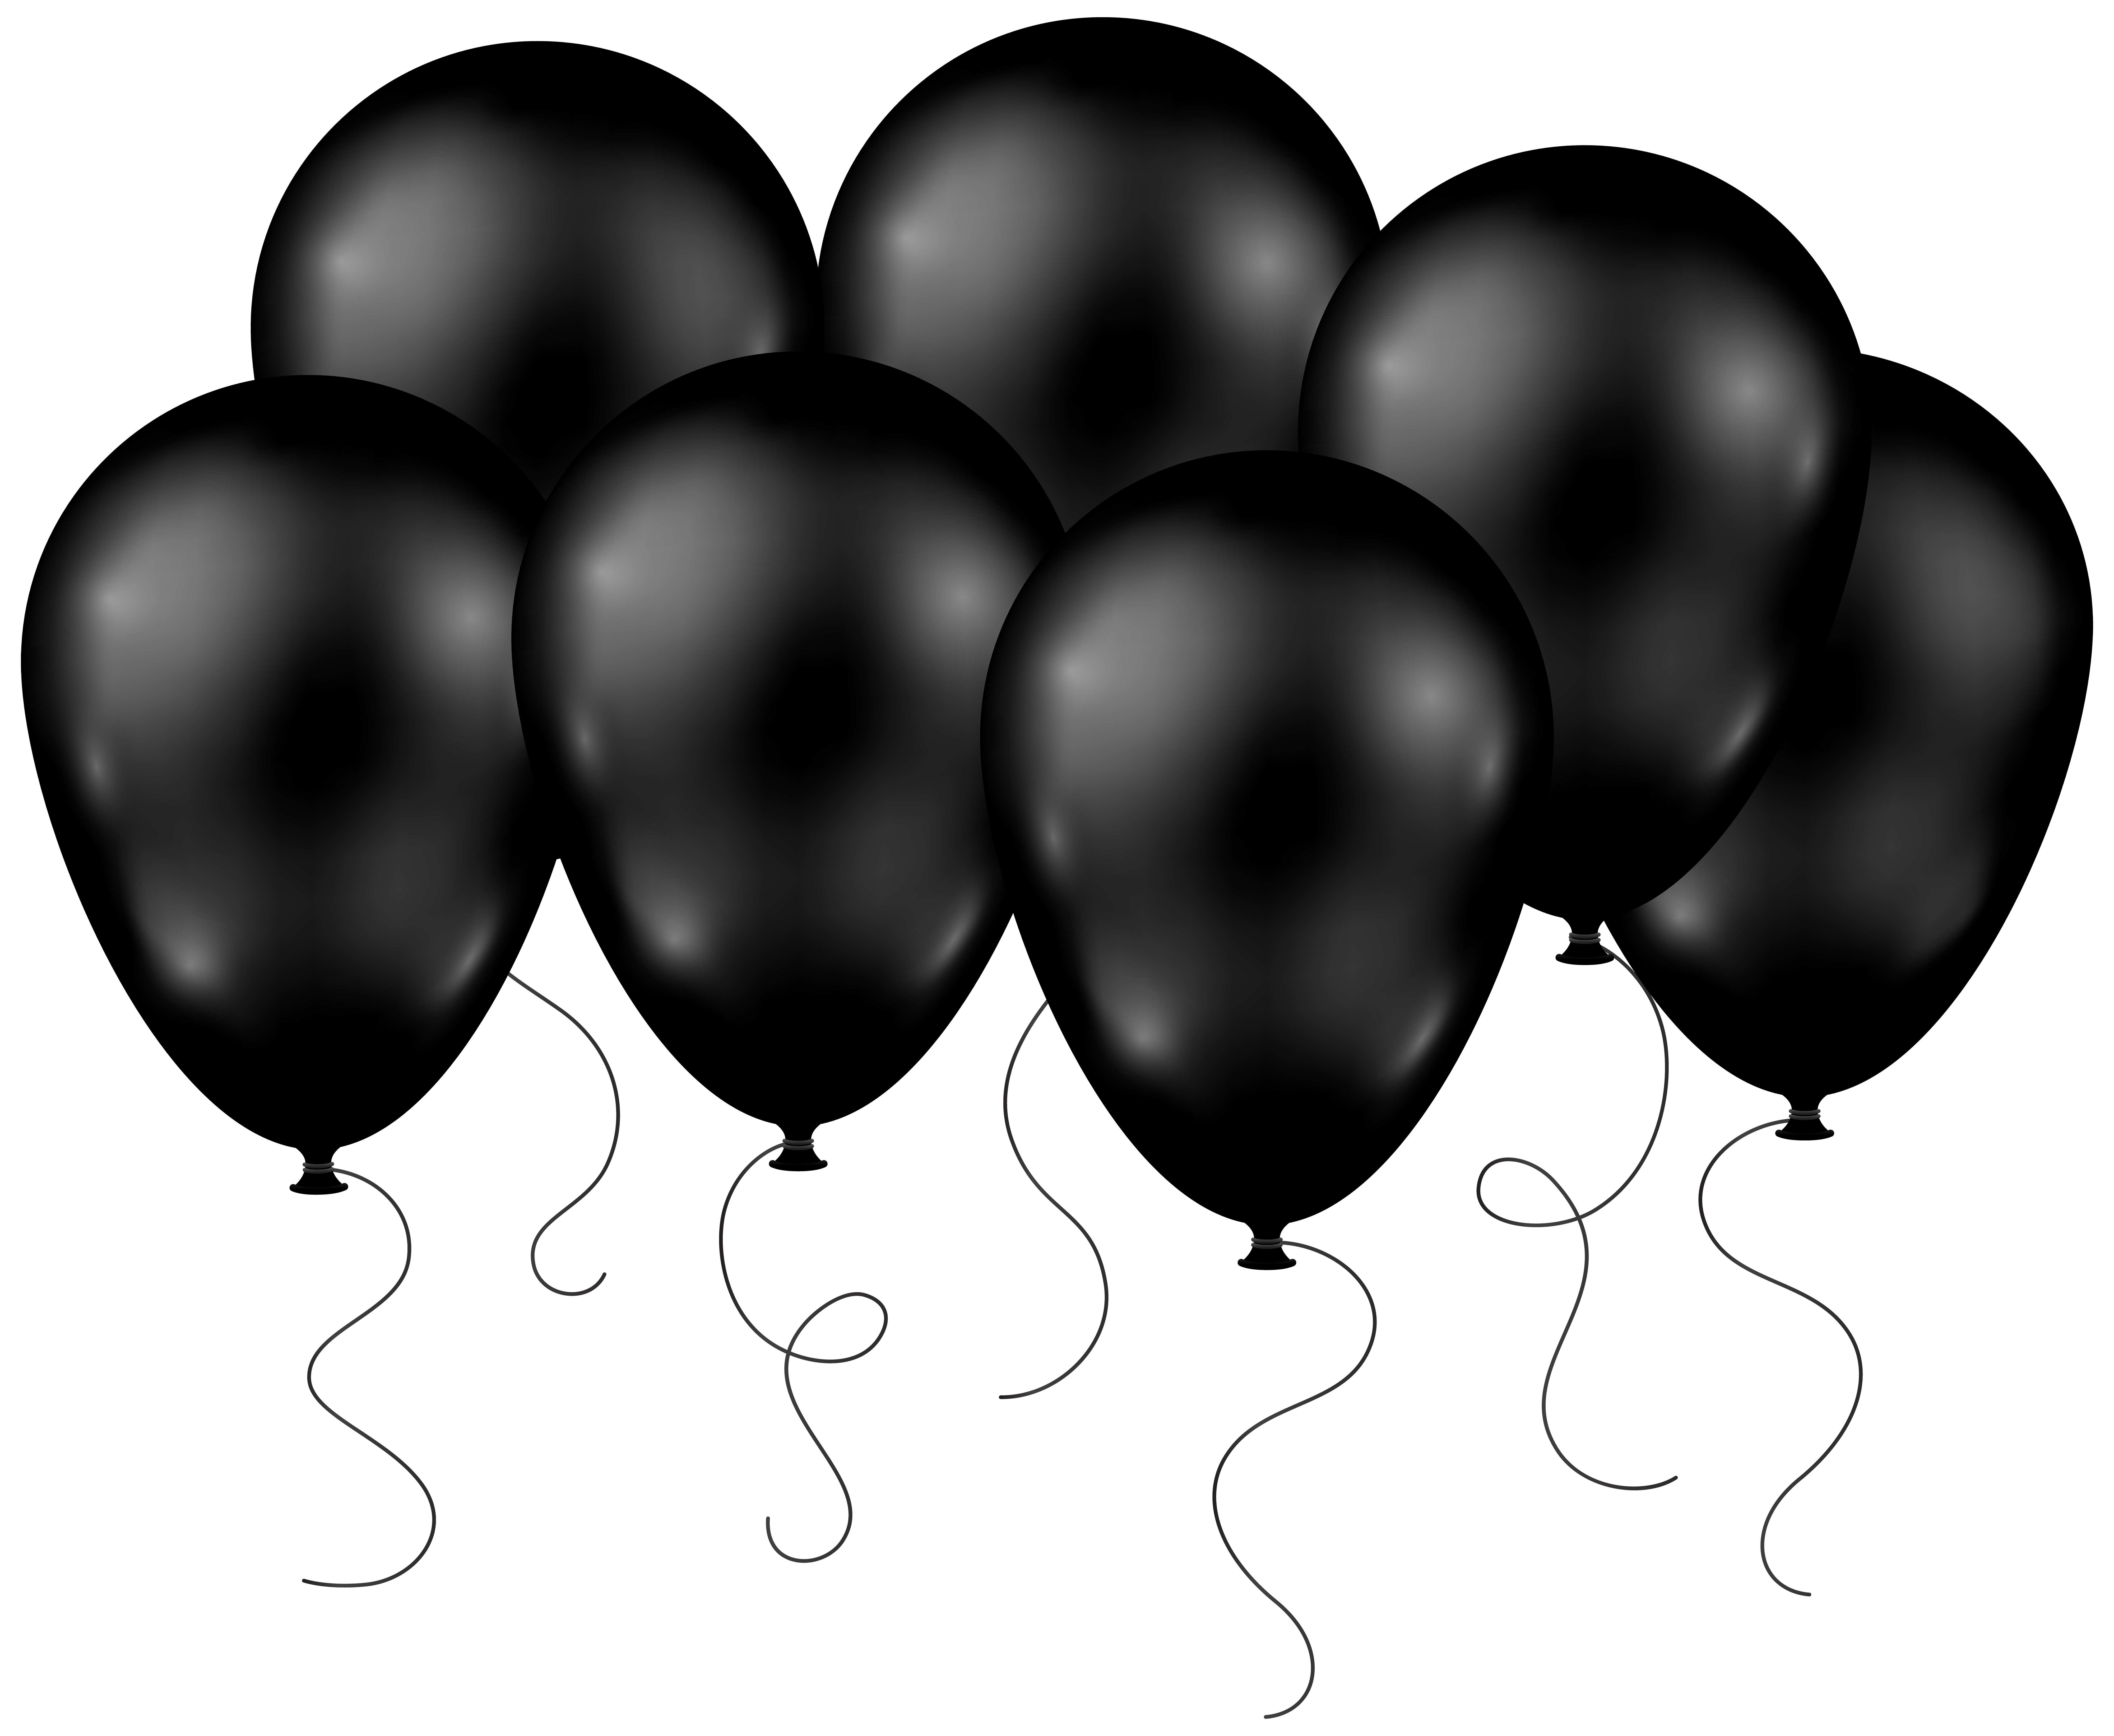 Clip Arts Related To : black balloons clipart. view all Black Balloons...